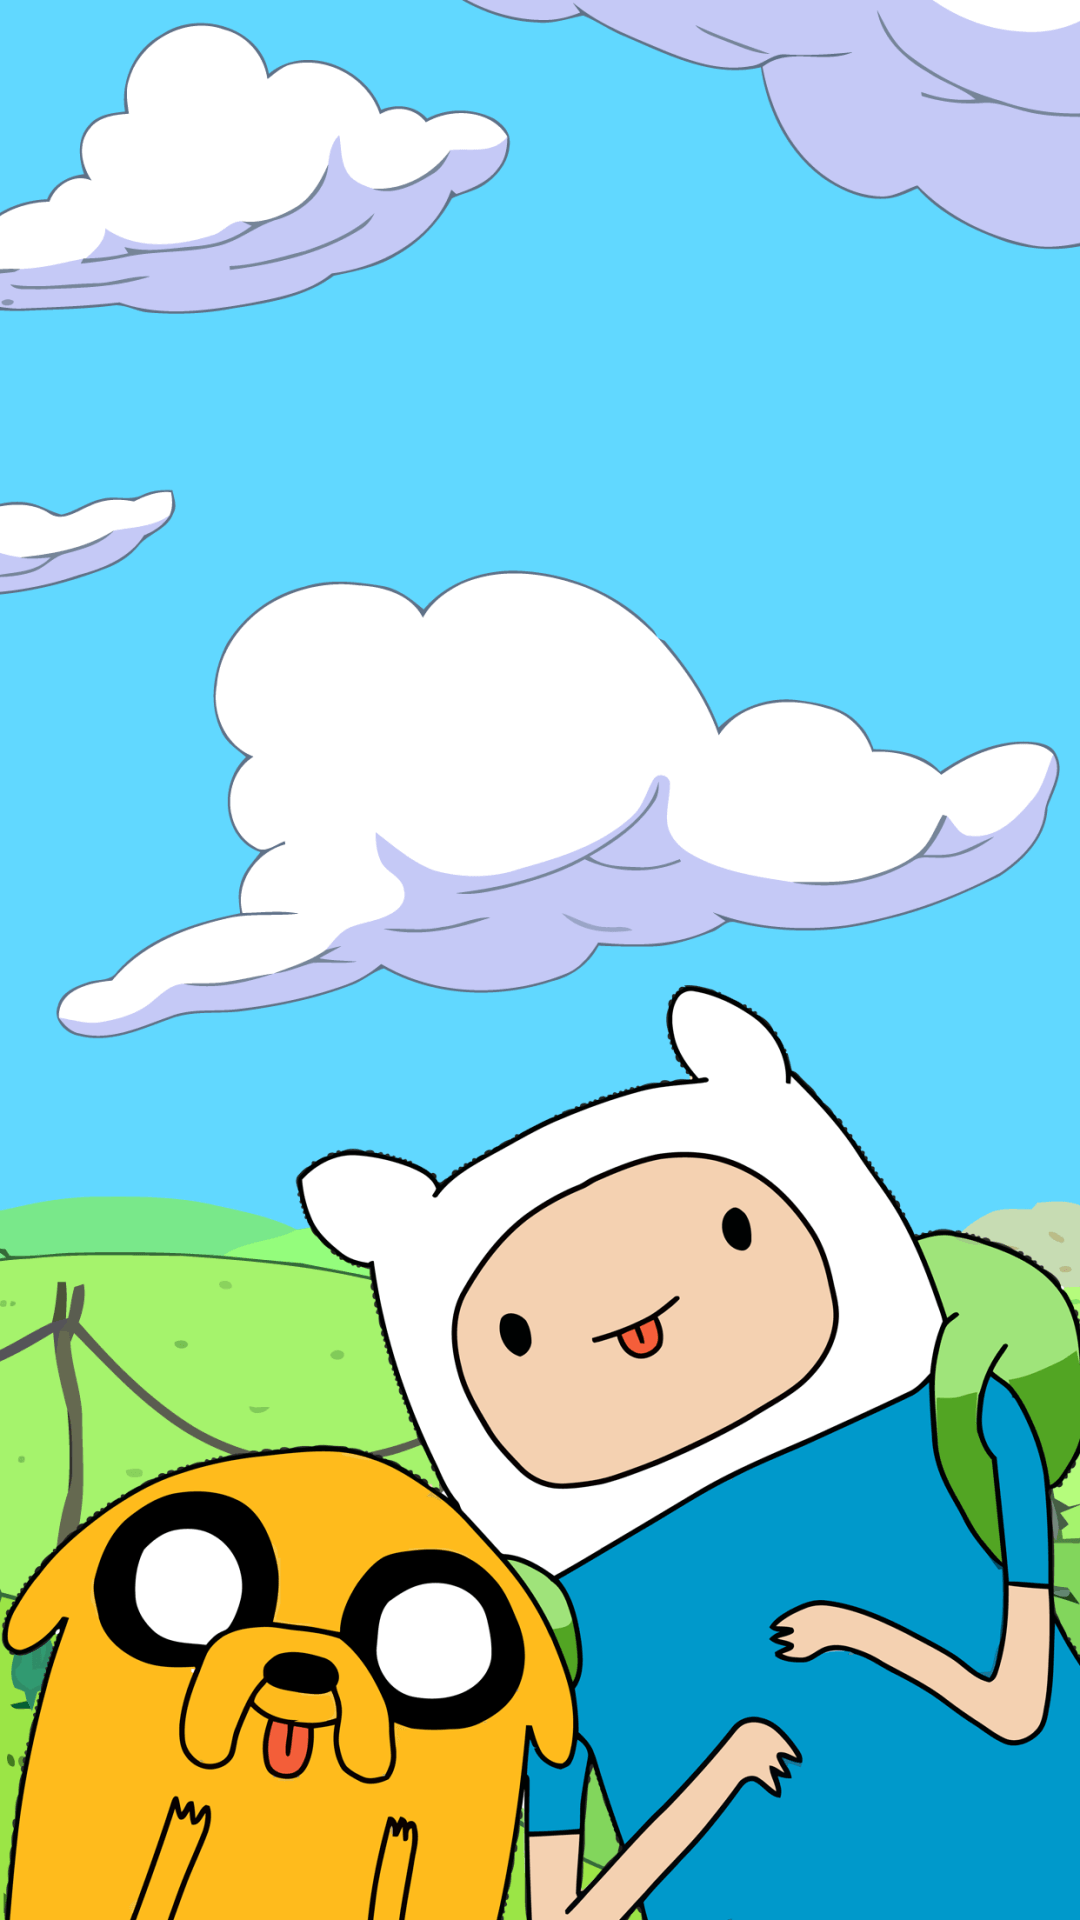 Aesthetic Adventure Time Background. Adventure time wallpaper, Adventure time drawings, Adventure time background